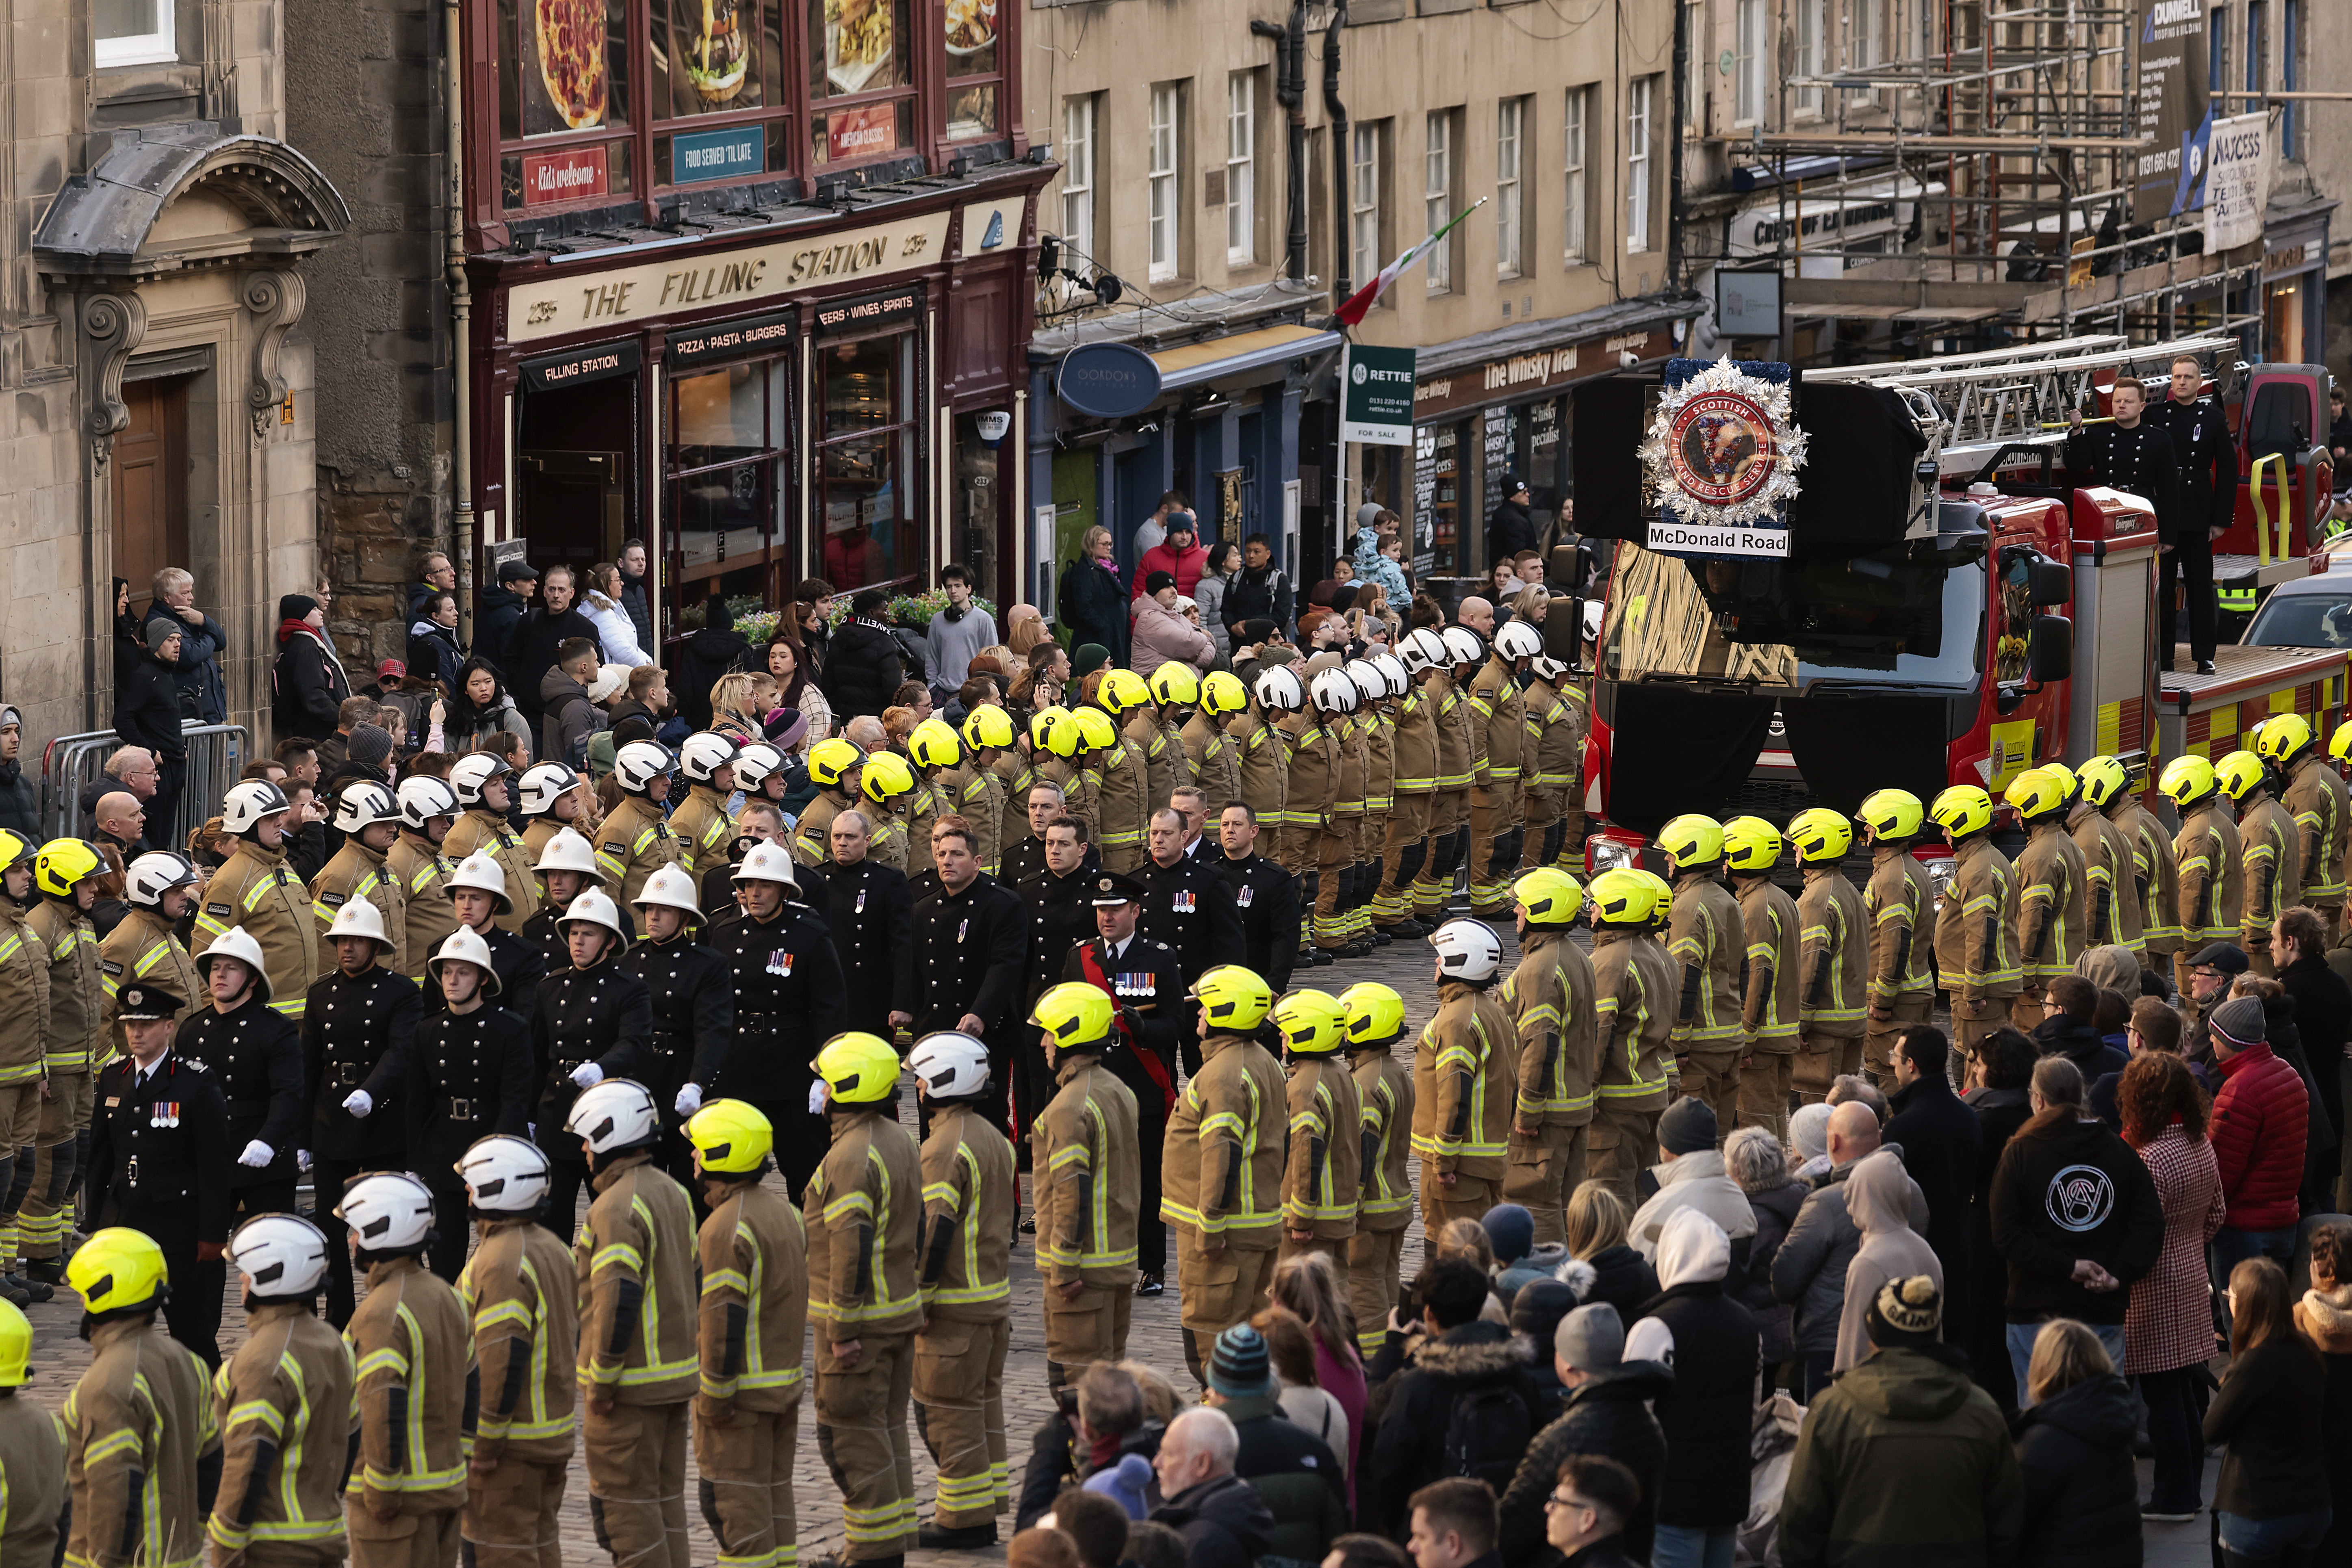 Members of the Scottish Fire and Rescue Service line the streets to pay their respects during the funeral of their colleague who died in the Jenners blaze at St Giles' Cathedral.